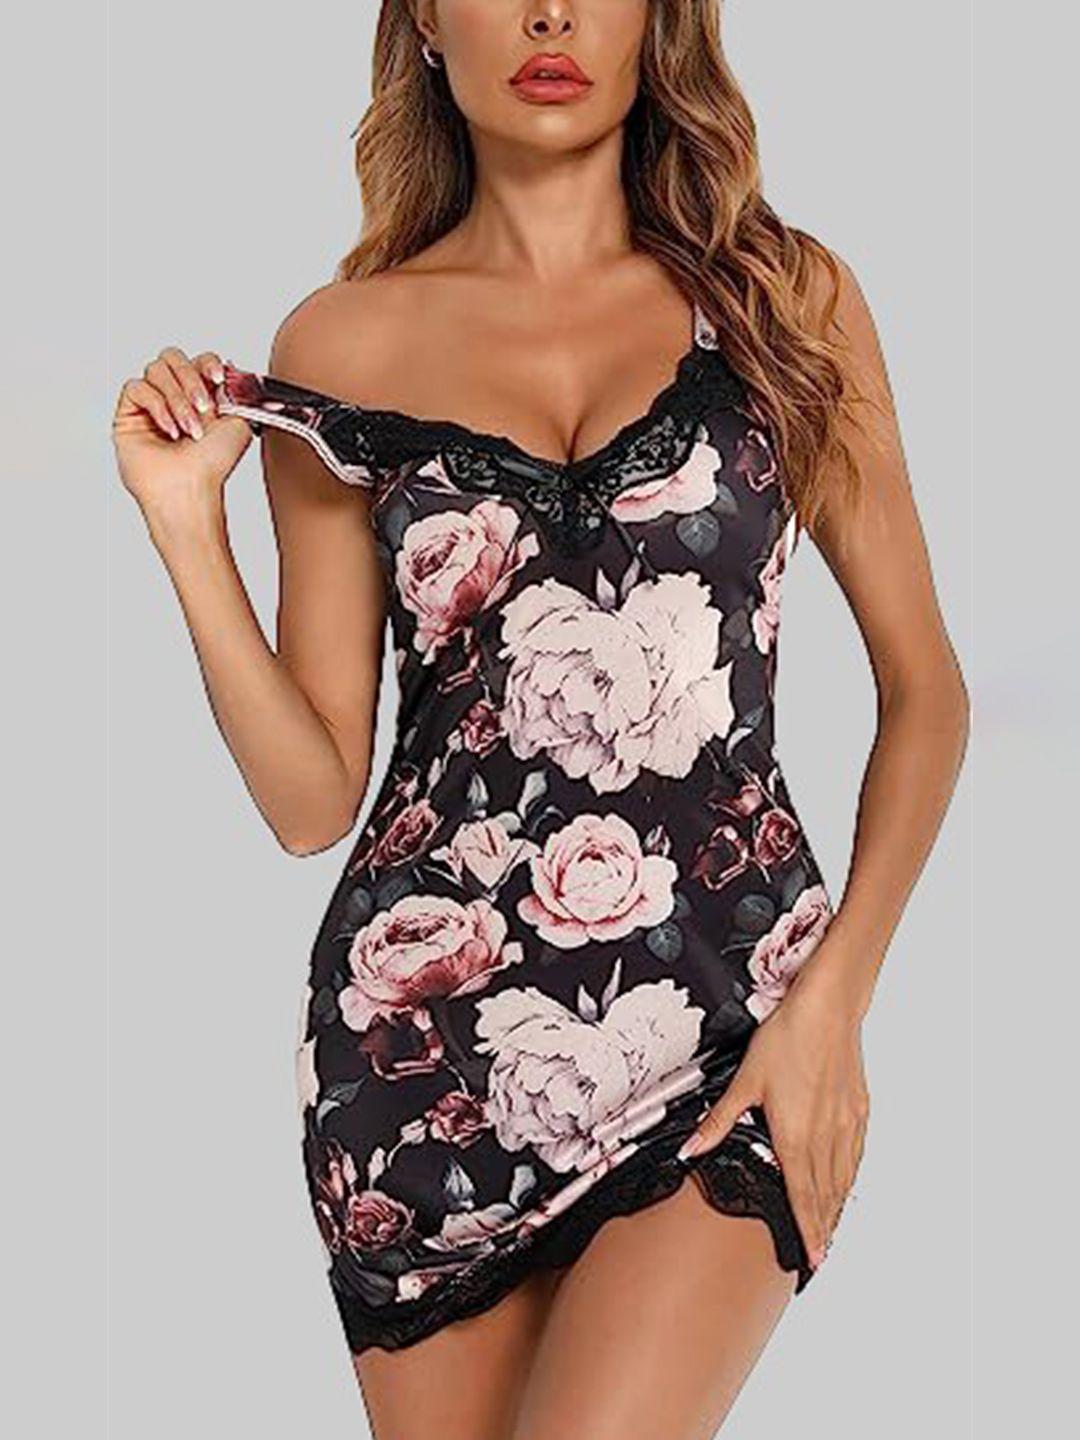 fimbul printed shoulder straps cotton baby doll